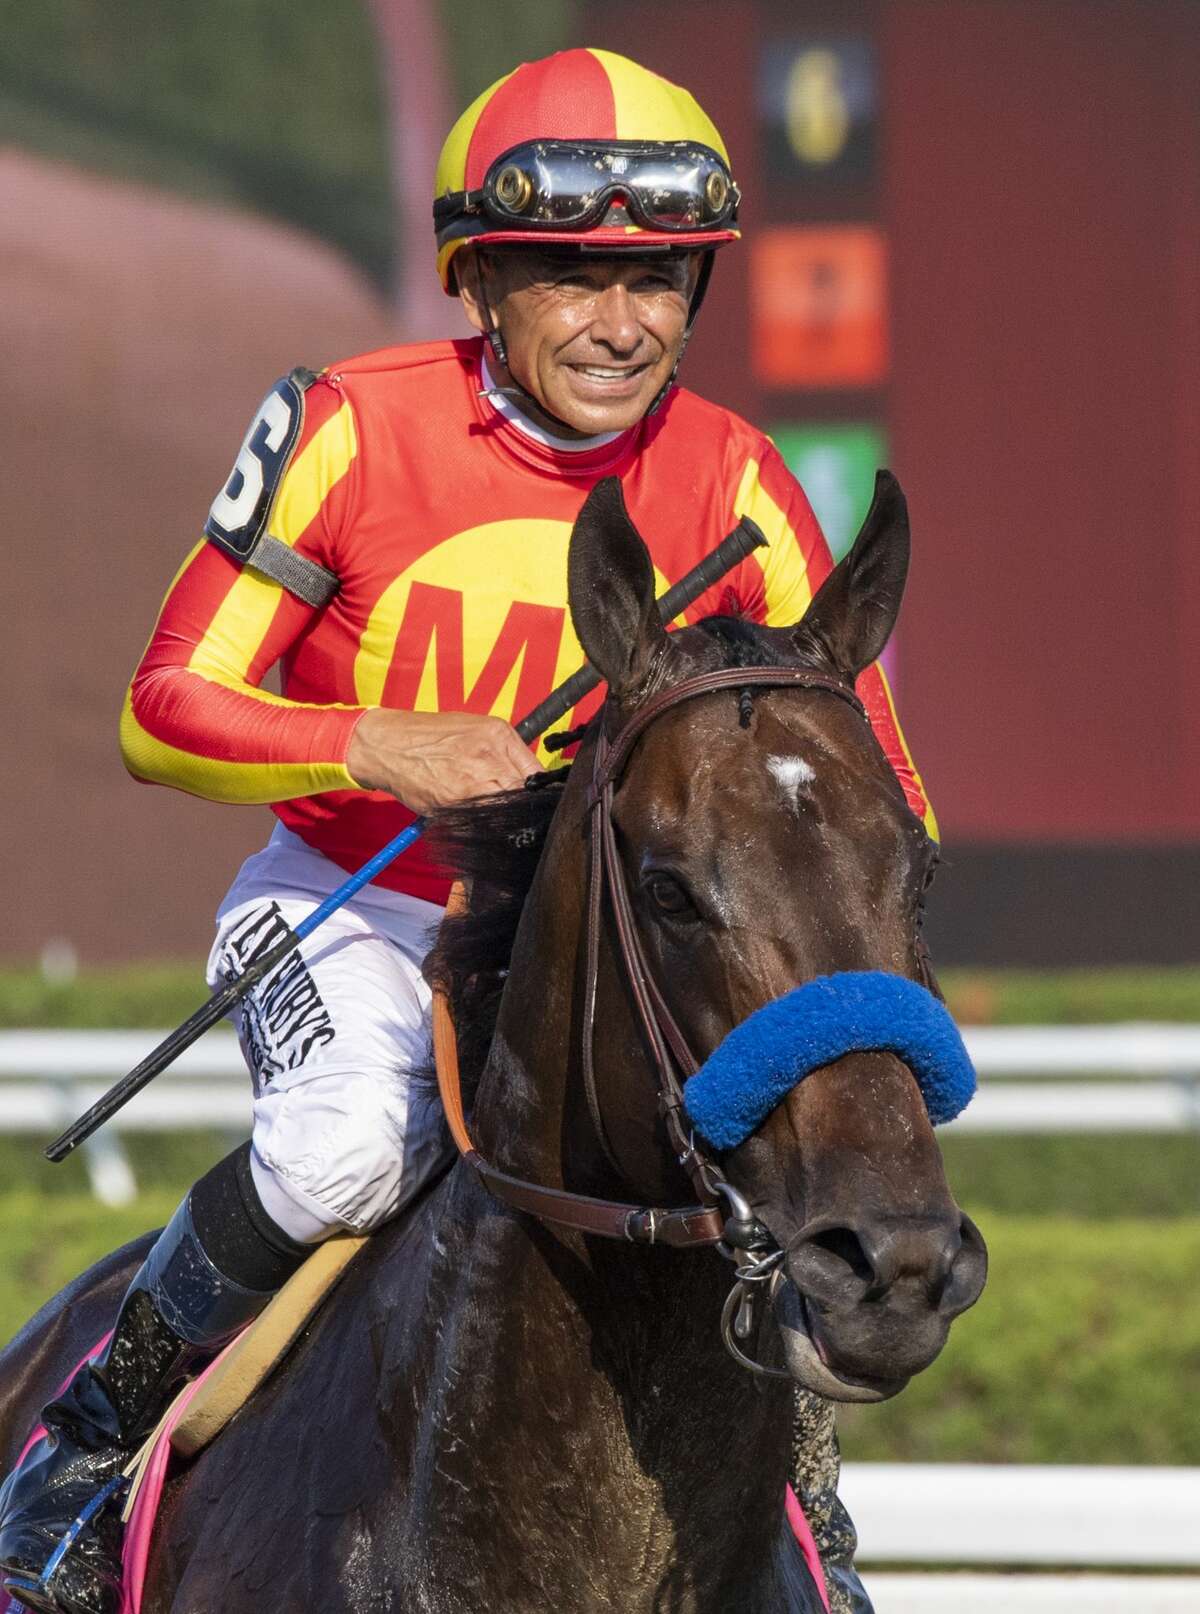 Jockey Mike Smith was all smiles in jubilation after winning the 92nd running of The Whitney on McKinzie at the Saratoga Race Course Saturday, Aug. 3, 2019 in Saratoga Springs, N.Y. Photo Special to the Times Union by Skip Dickstein